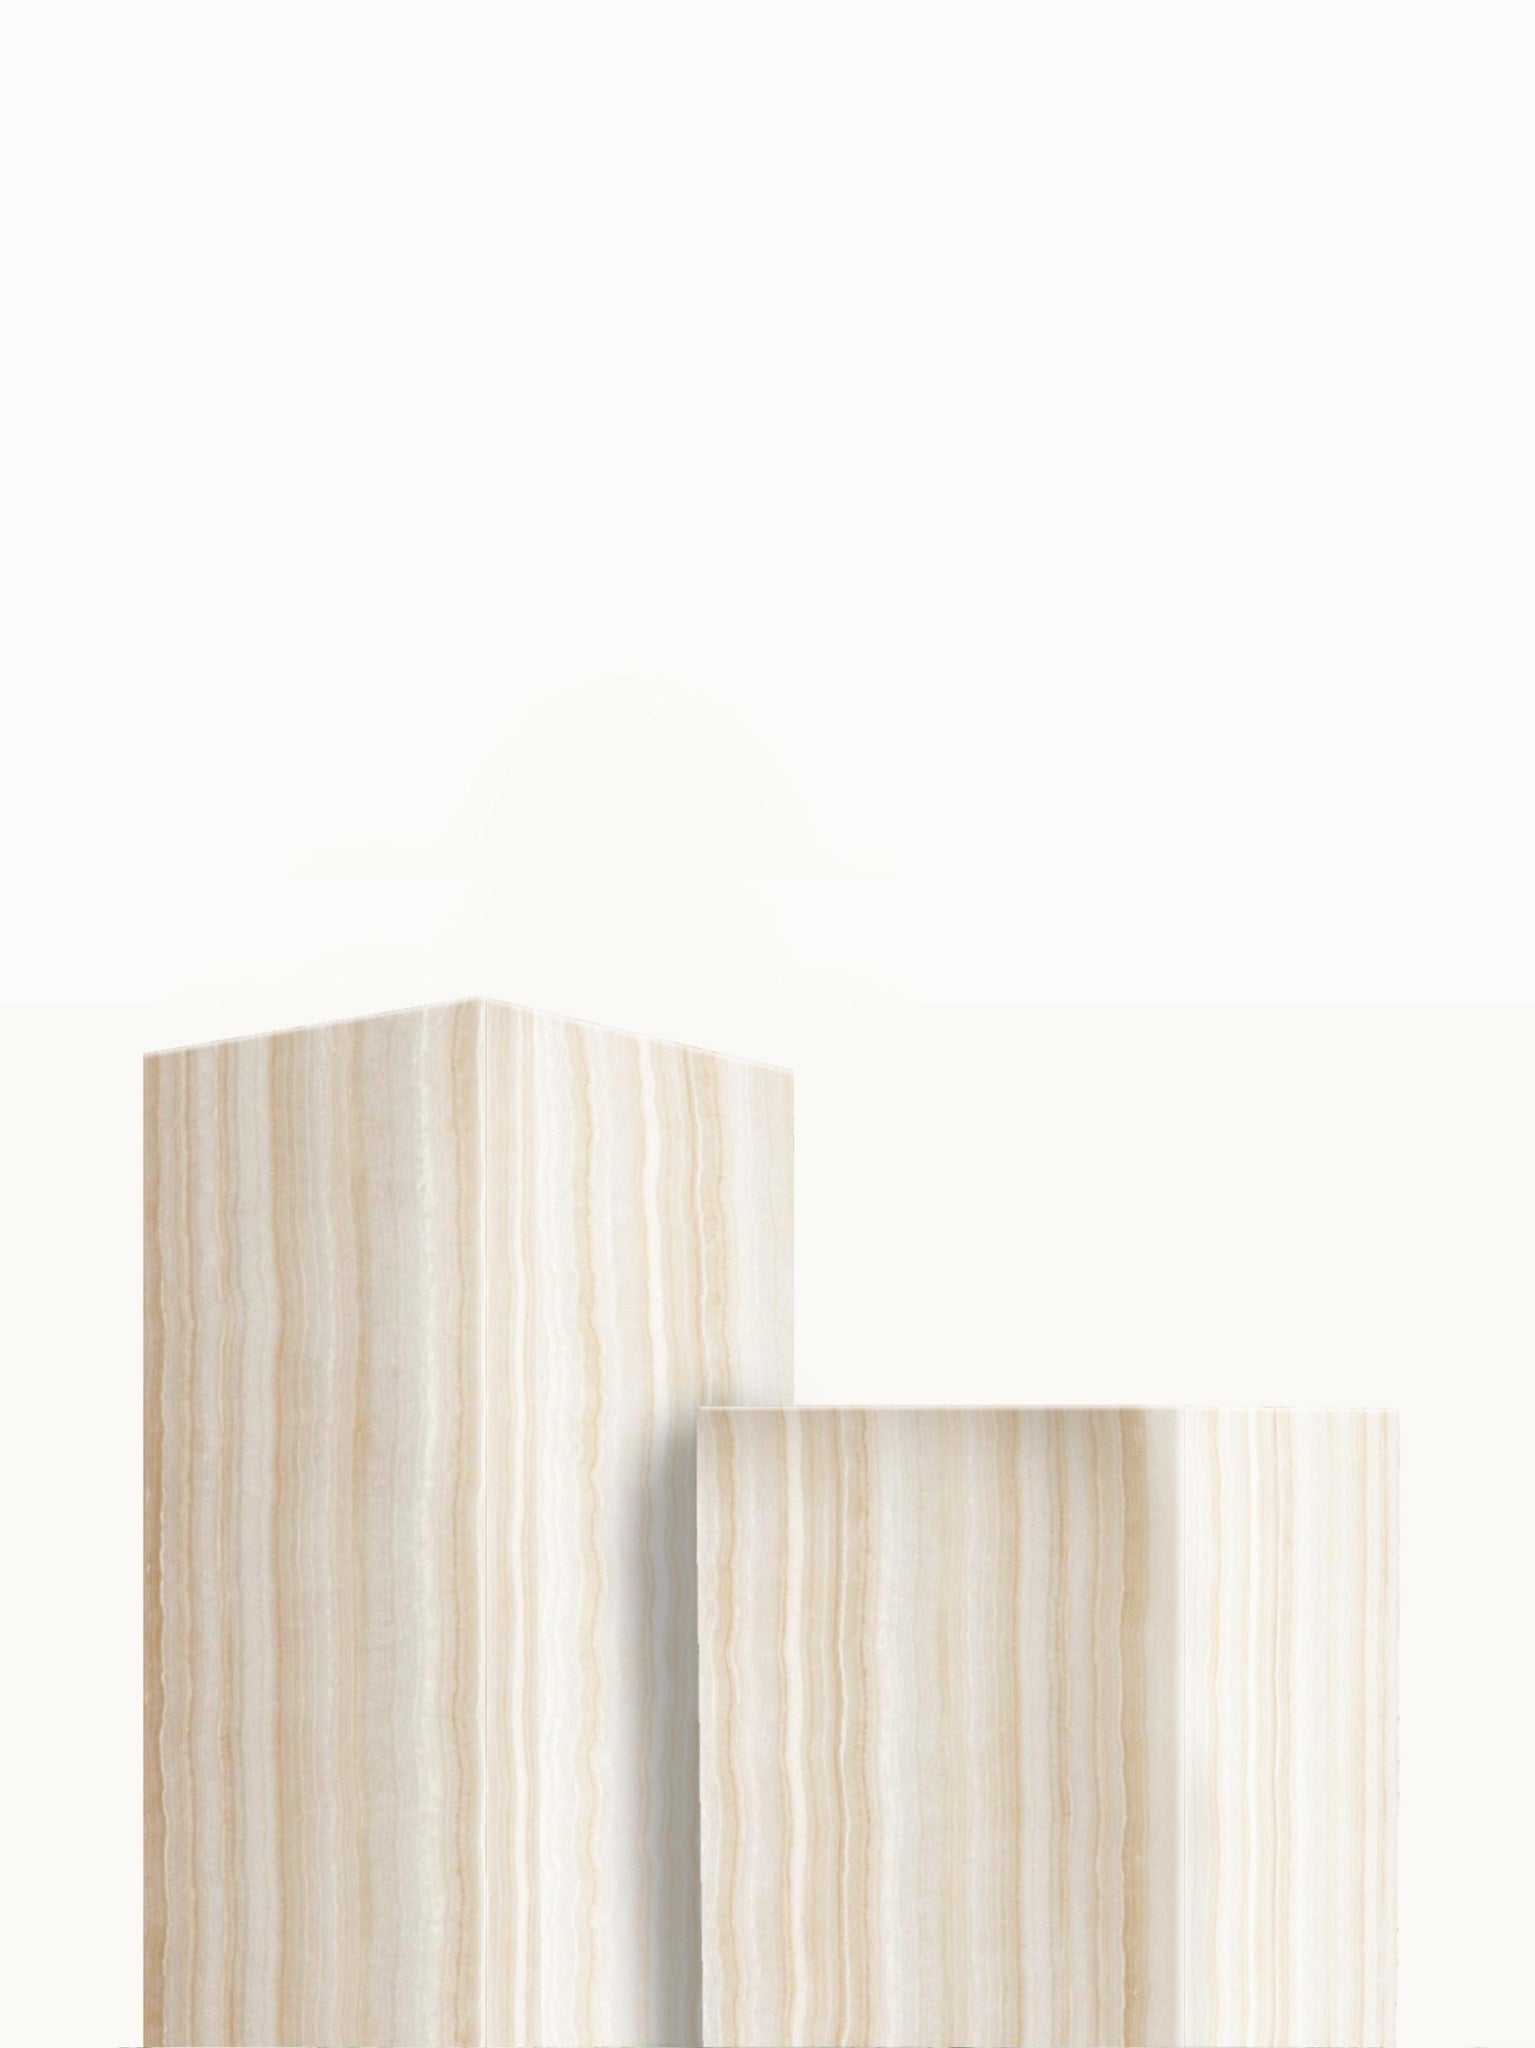 [Made-to-Order] FORTE Plinth – no. 80